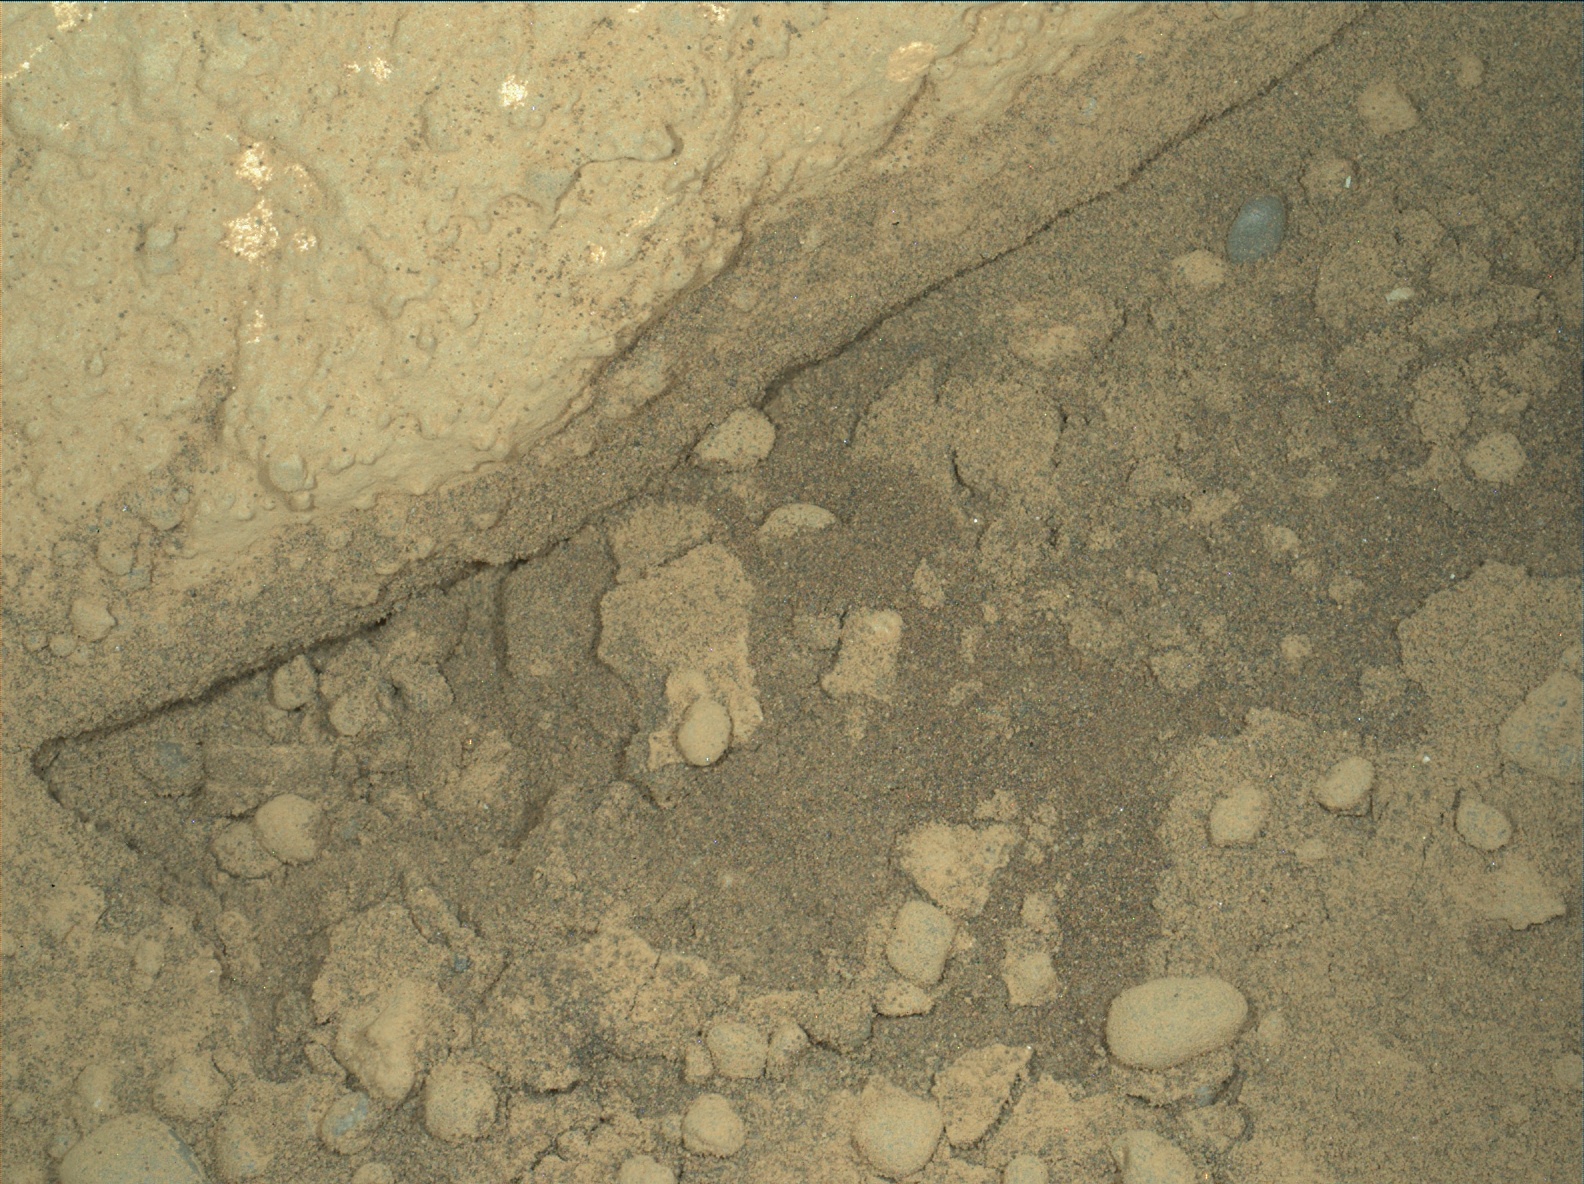 Nasa's Mars rover Curiosity acquired this image using its Mars Hand Lens Imager (MAHLI) on Sol 293